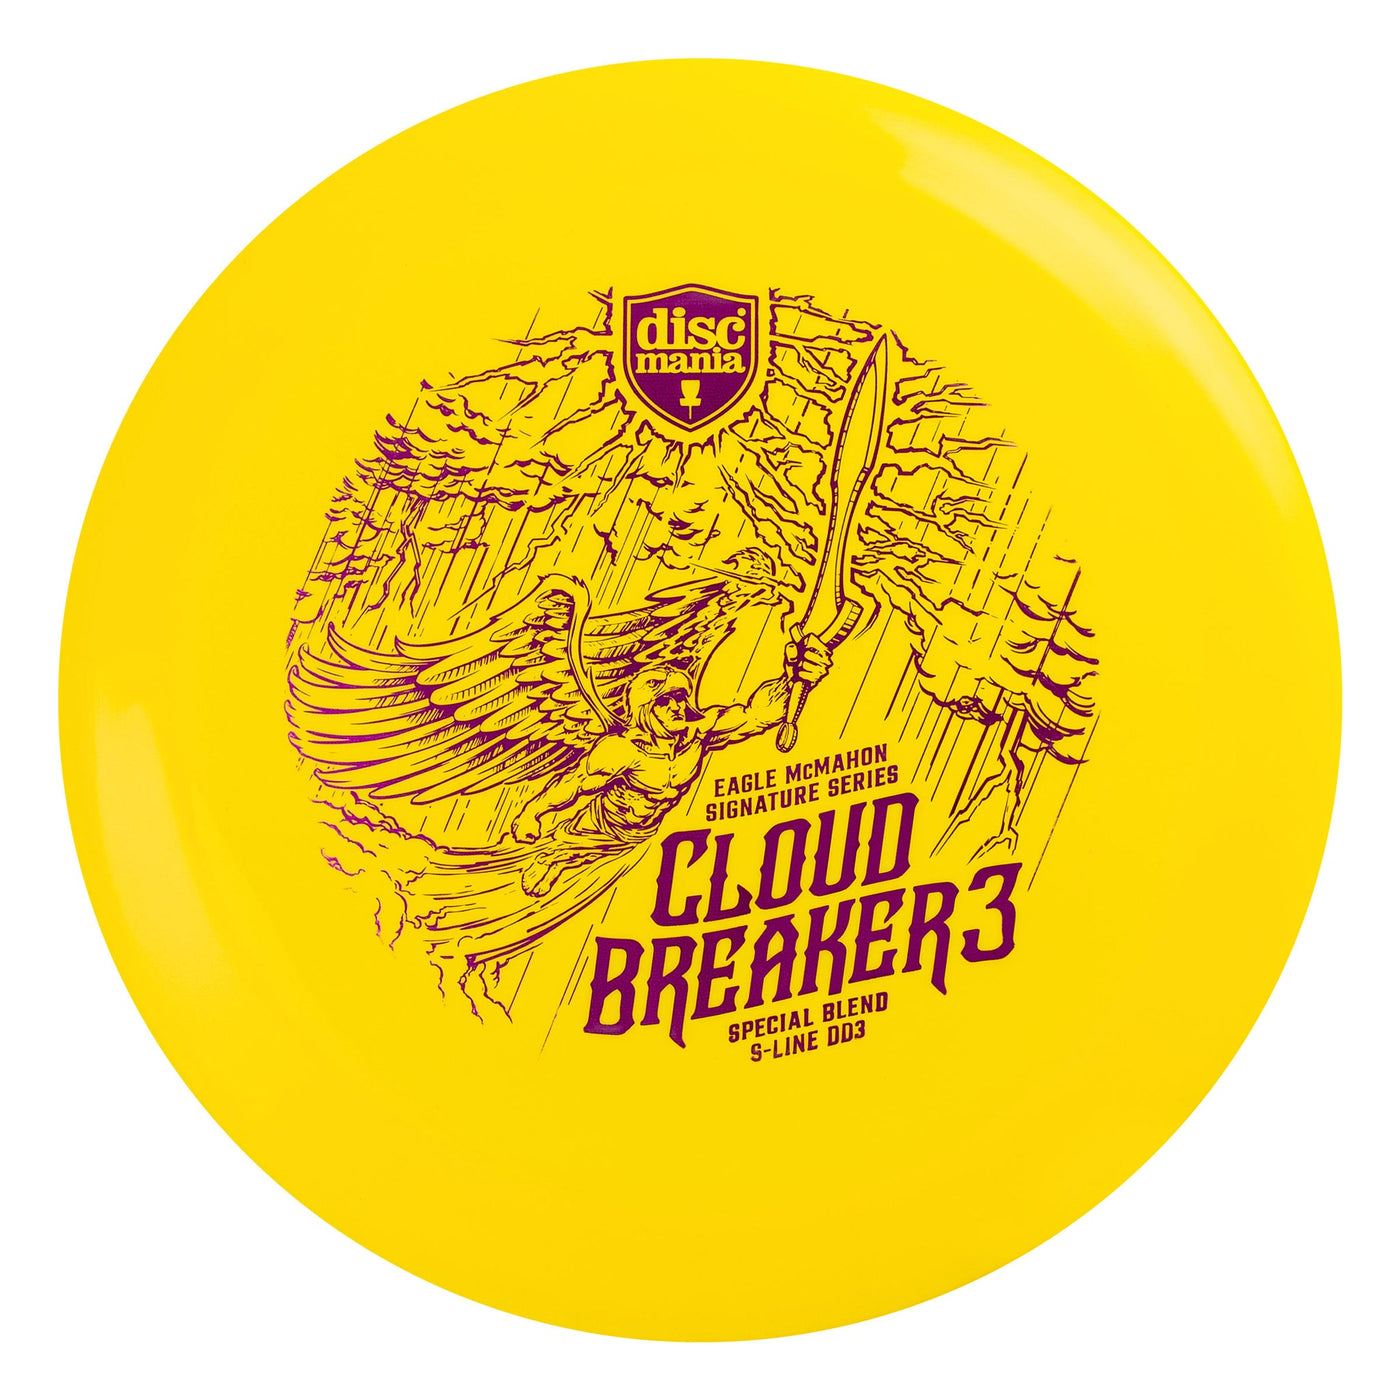 Discmania S-Line Special Blend DD3 Distance Driver with Cloud Breaker 3 Eagle McMahon Signature Series Stamp - Speed 12